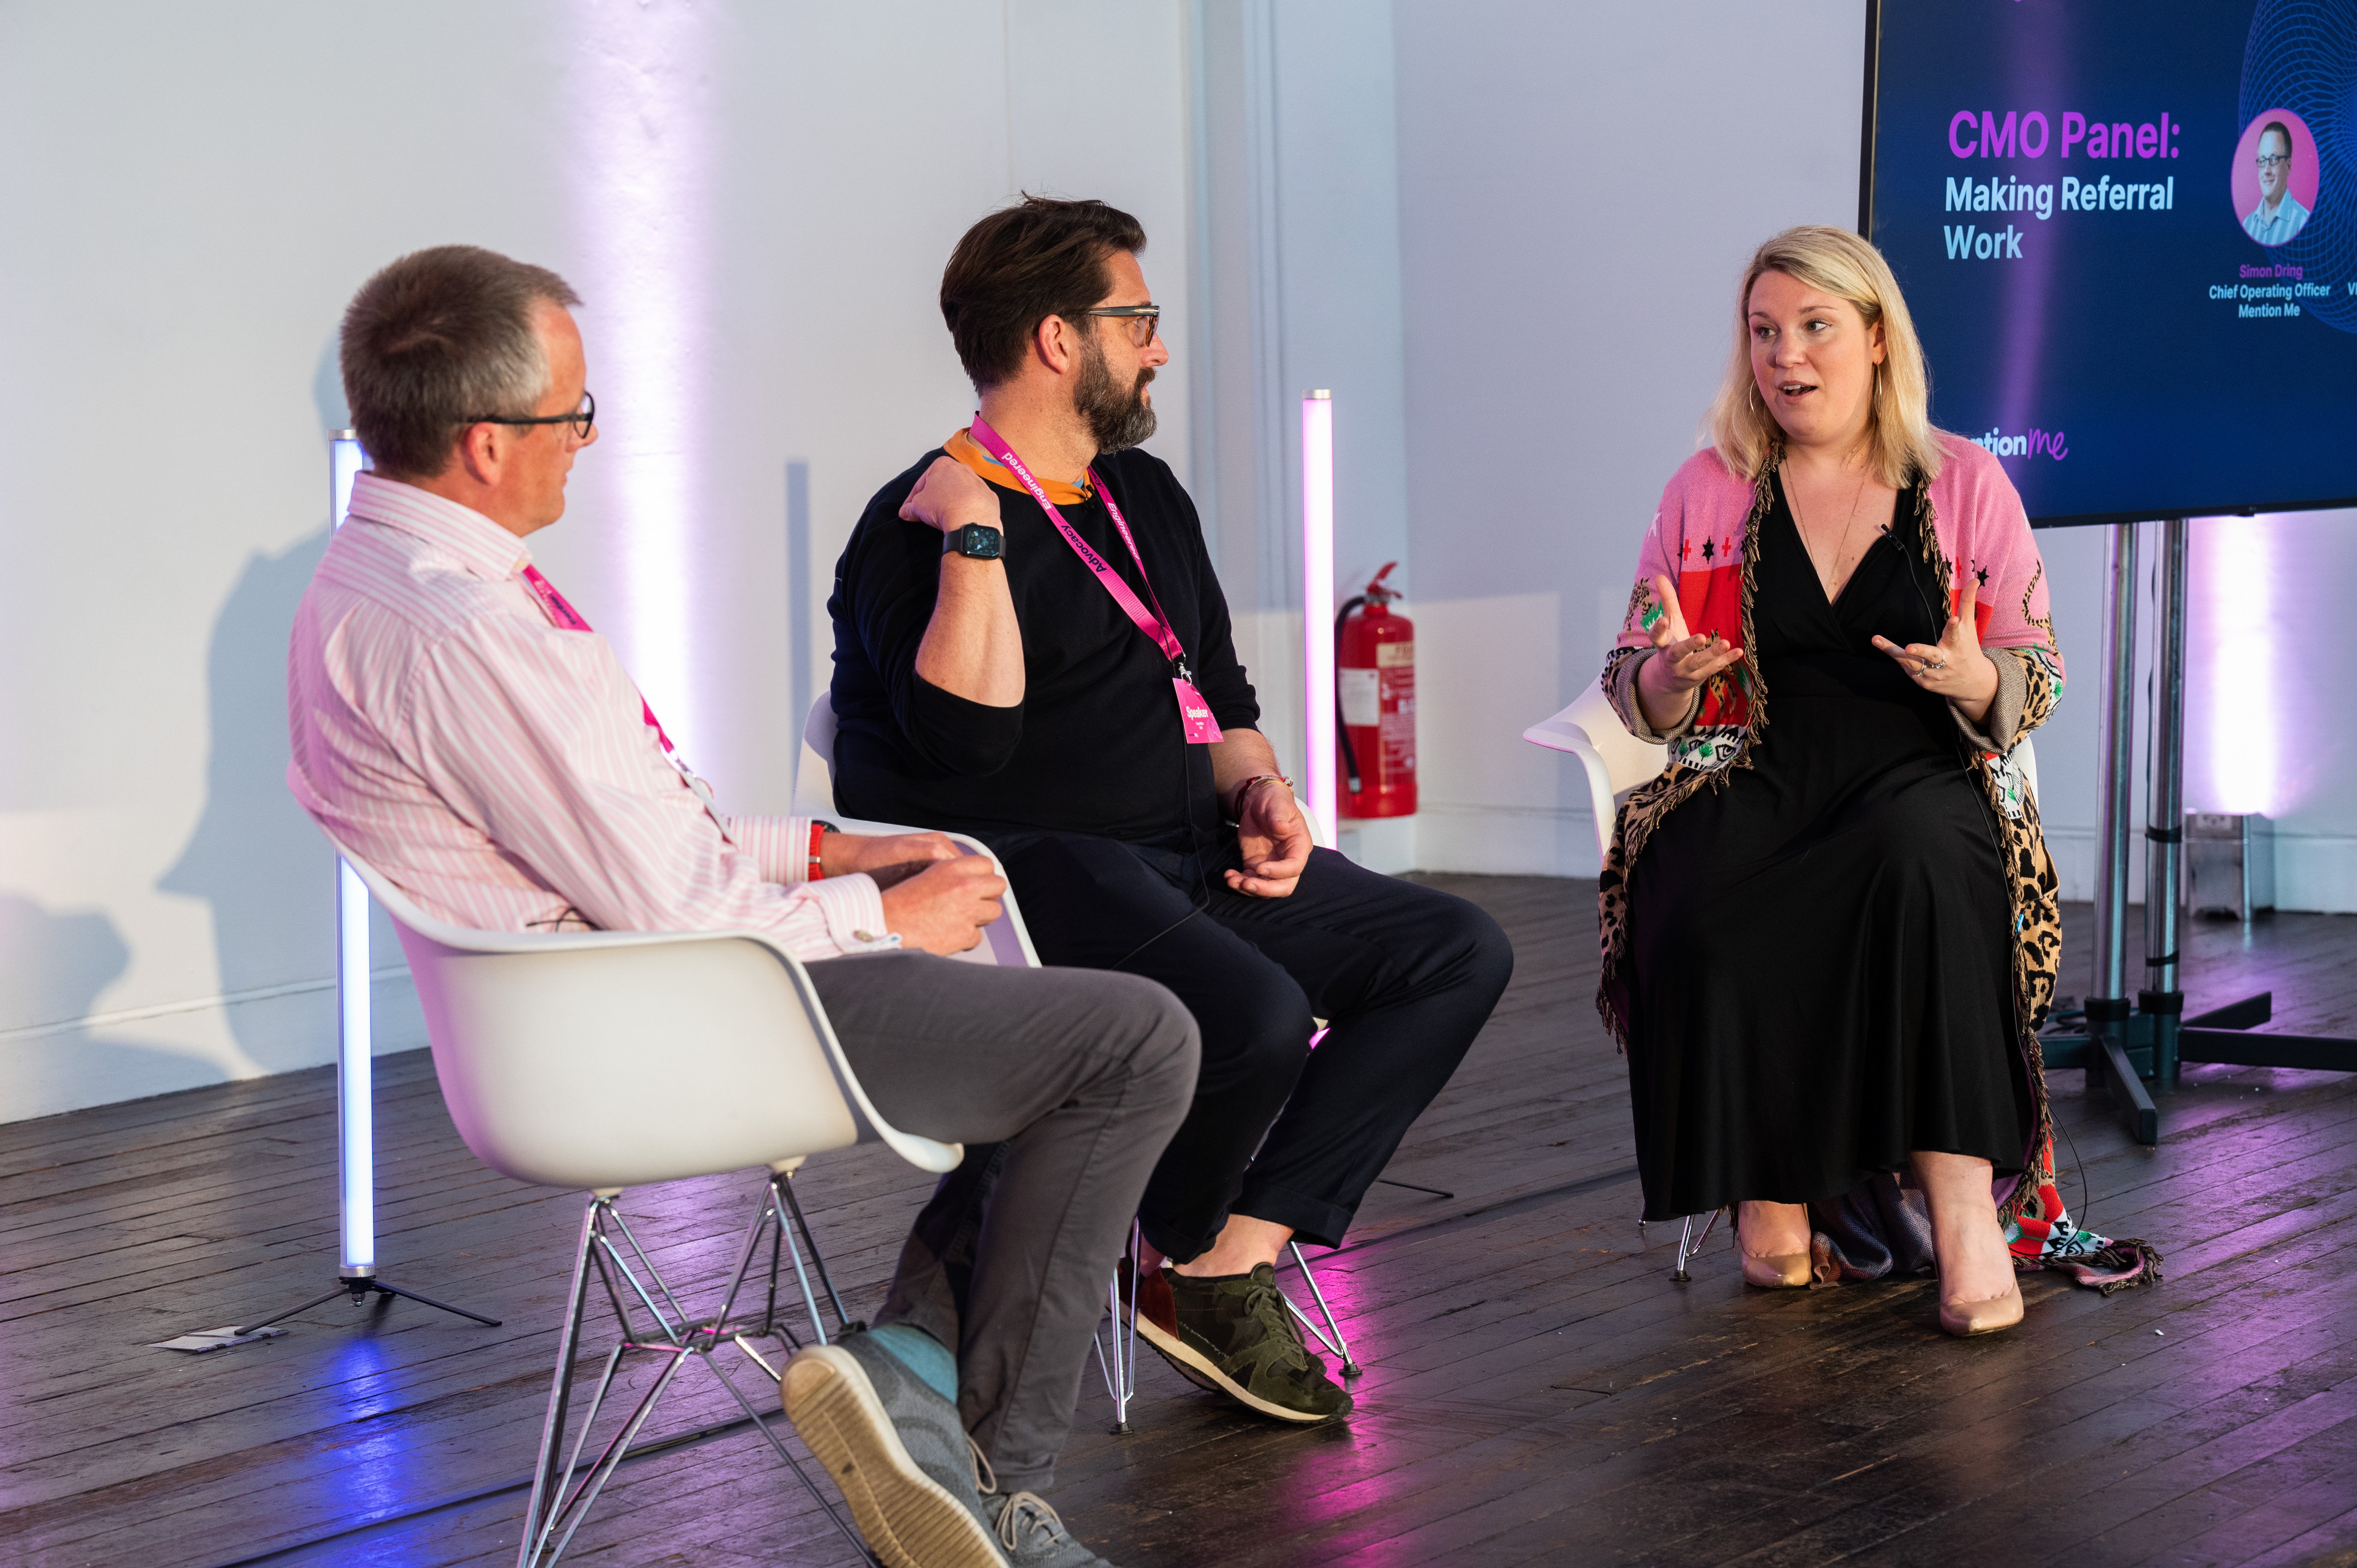 Simon Dring, COO at Mention Me, is joined by Tony Miller, VP Growth & Performance Marketing at WW and Laura Riches, co-founder of Laylo for our CMO Panel